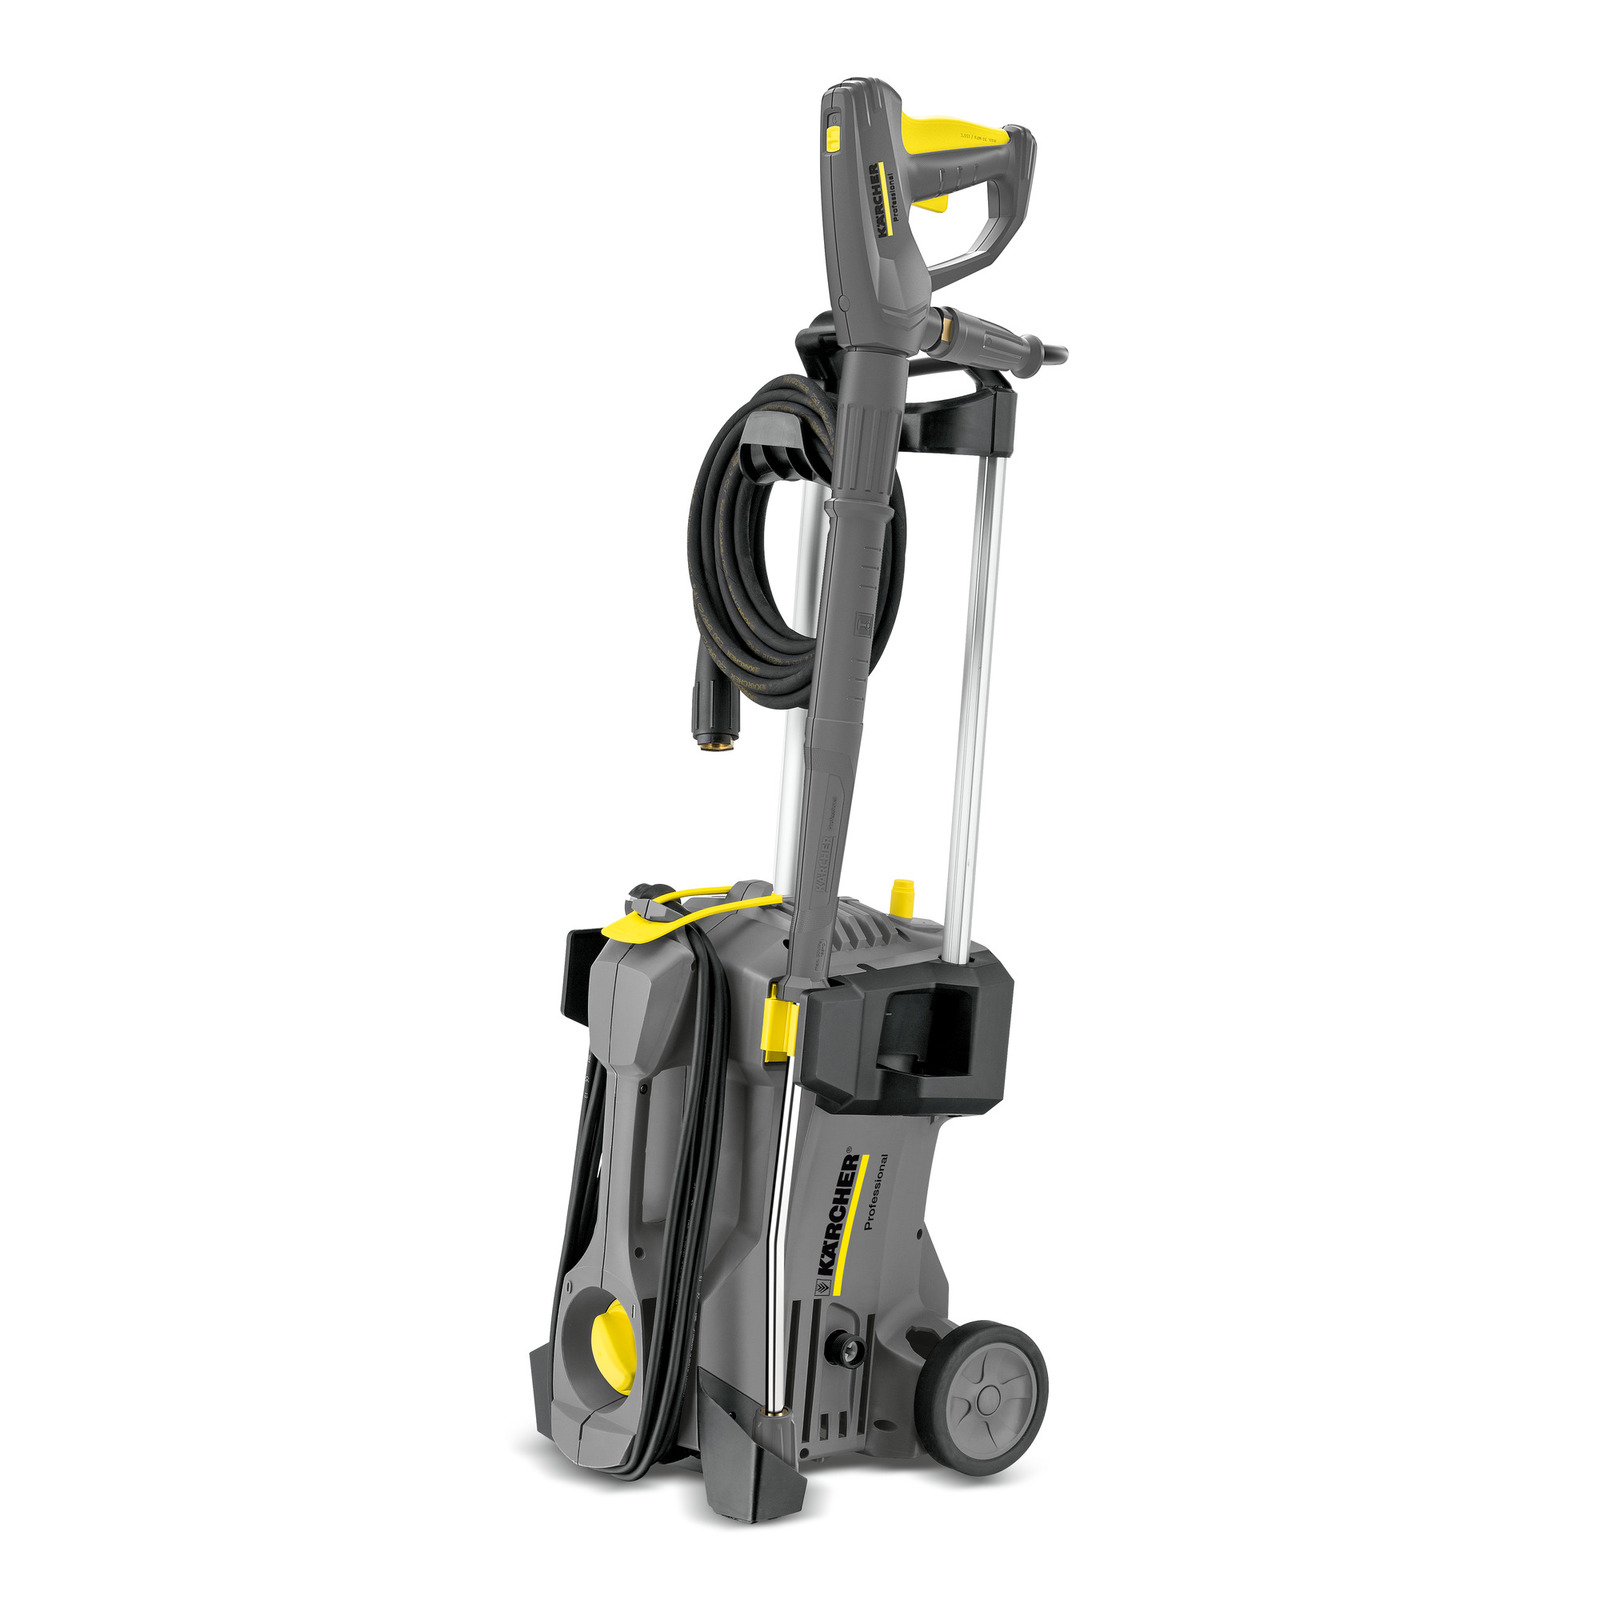 Karcher Pro HD 400 karcher, hd, 1.8/13 c, pressure, washer, wash, cold-water, professional, commercial, powerful, electric, portable, cleaning, clean, 